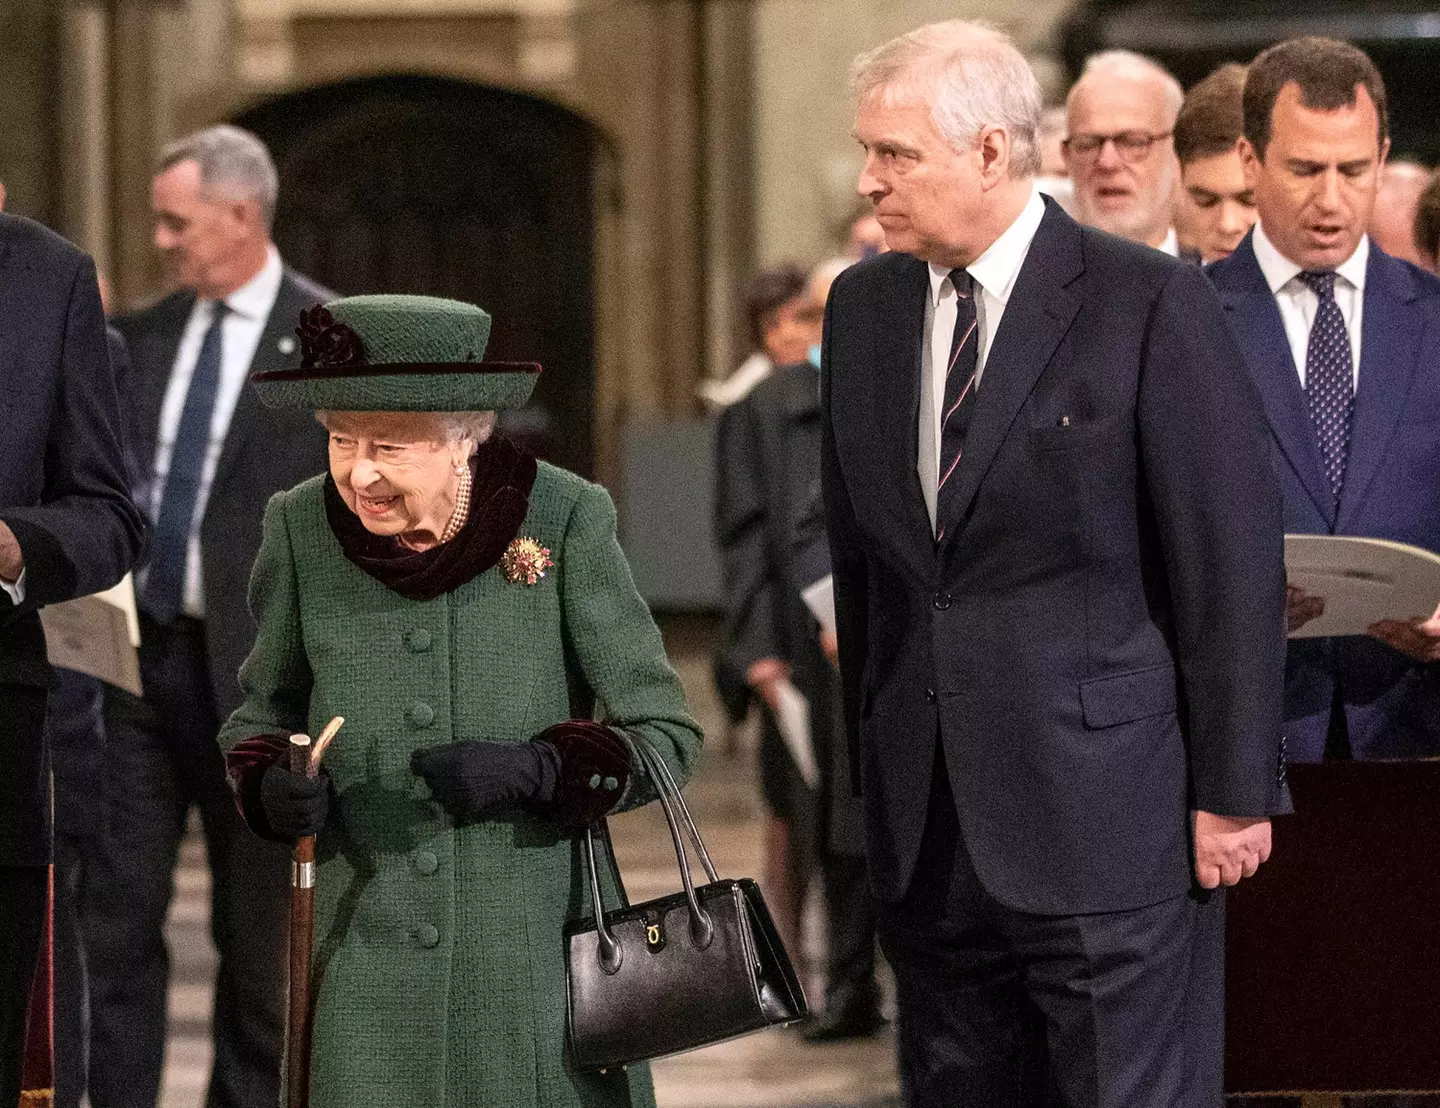 Prince Andrew escorted the Queen on Tuesday (